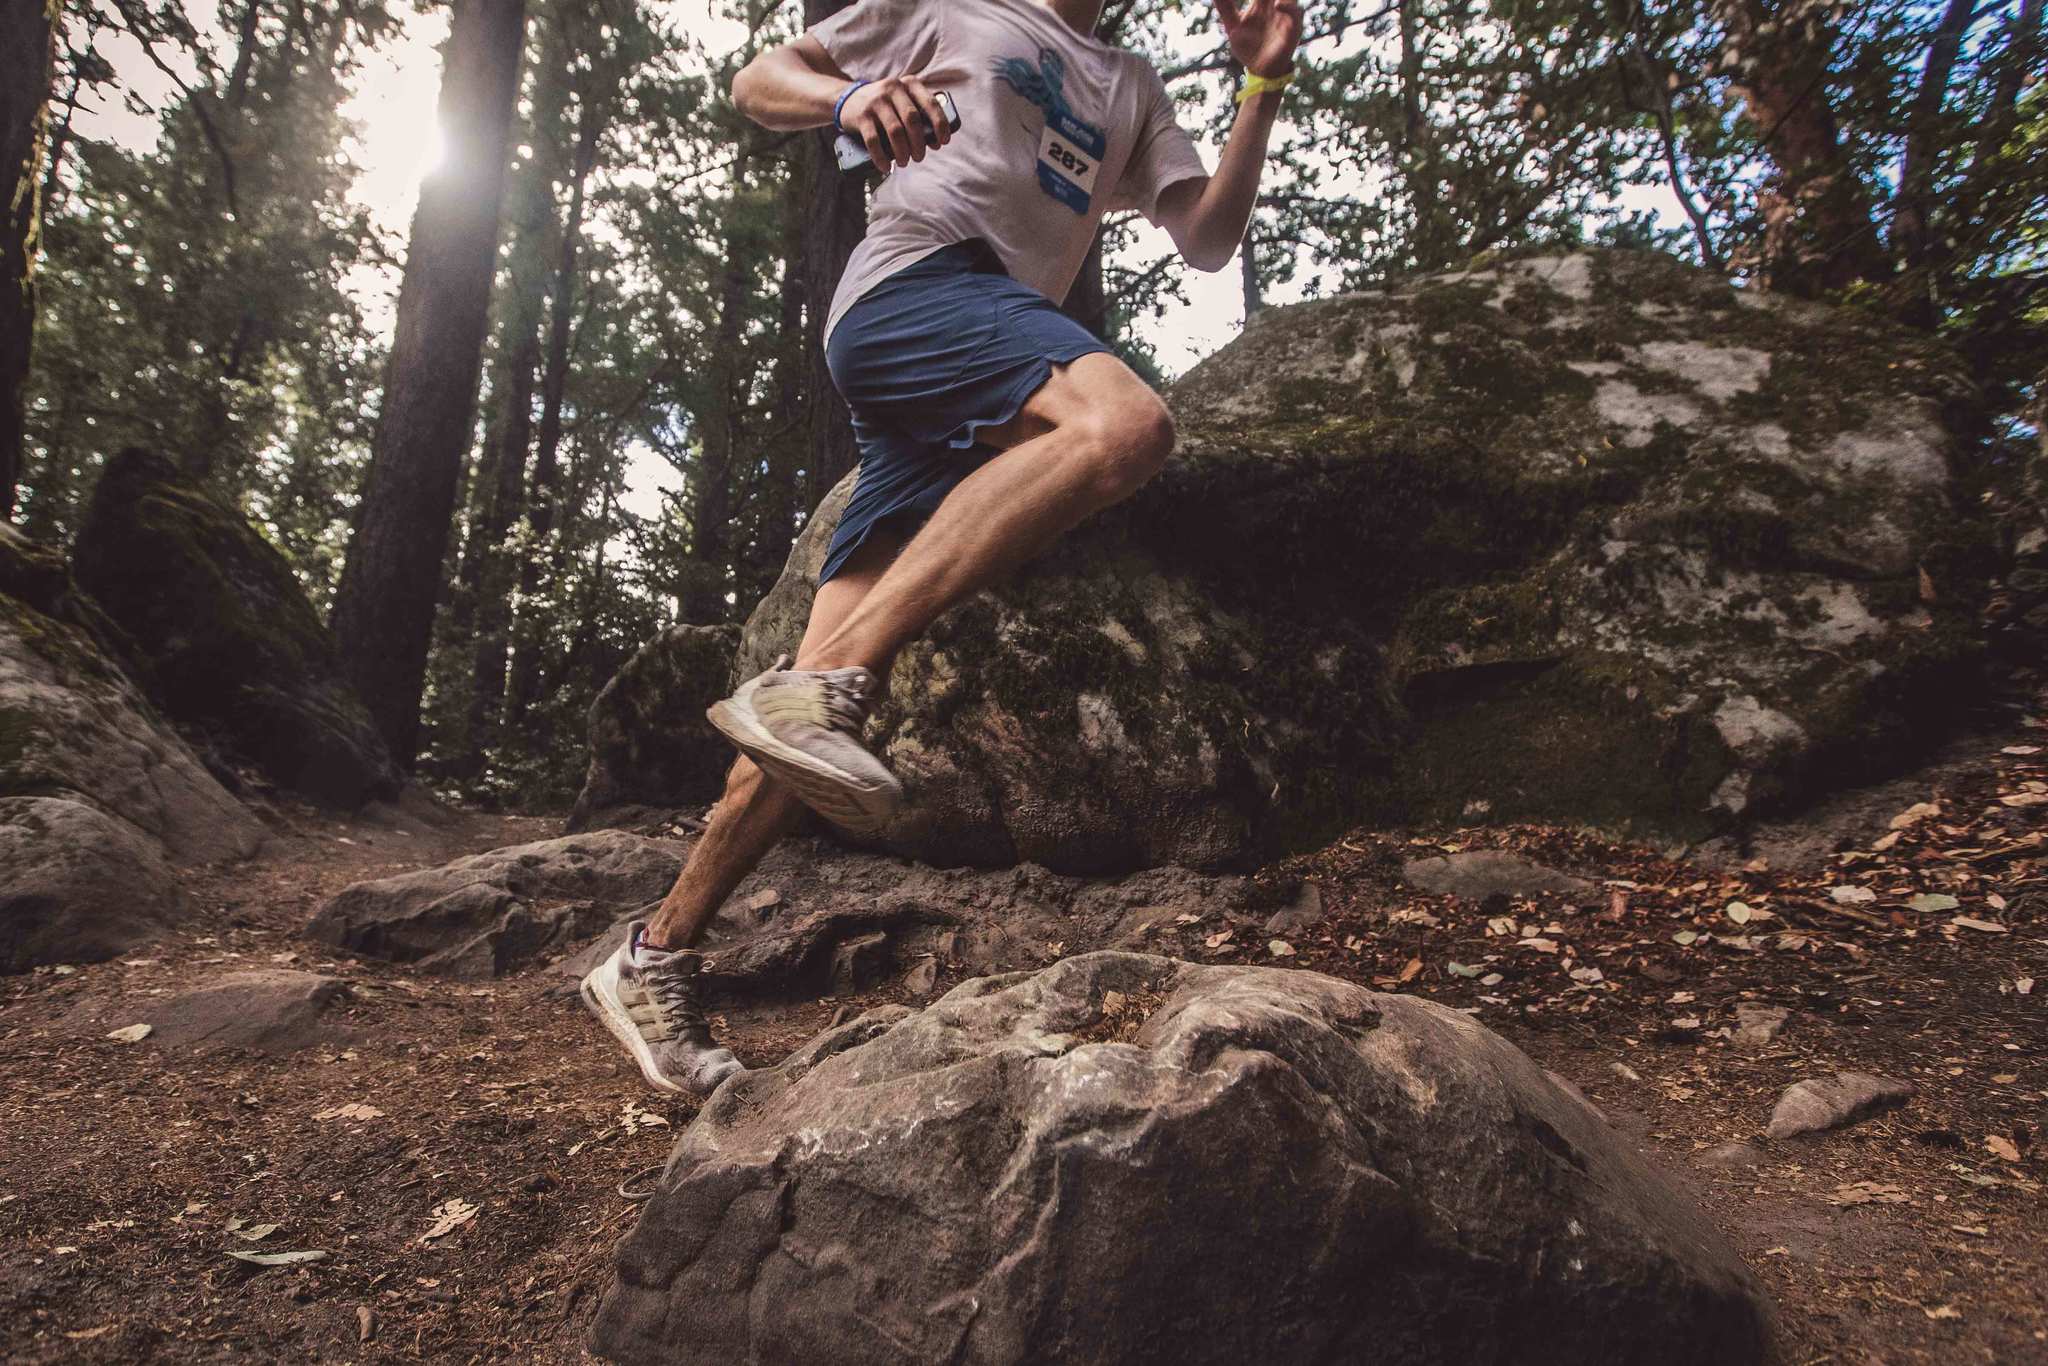 A Spartan Trail racer is able to race on the trail over rough terrain after preparing with exercises for IT band issues.